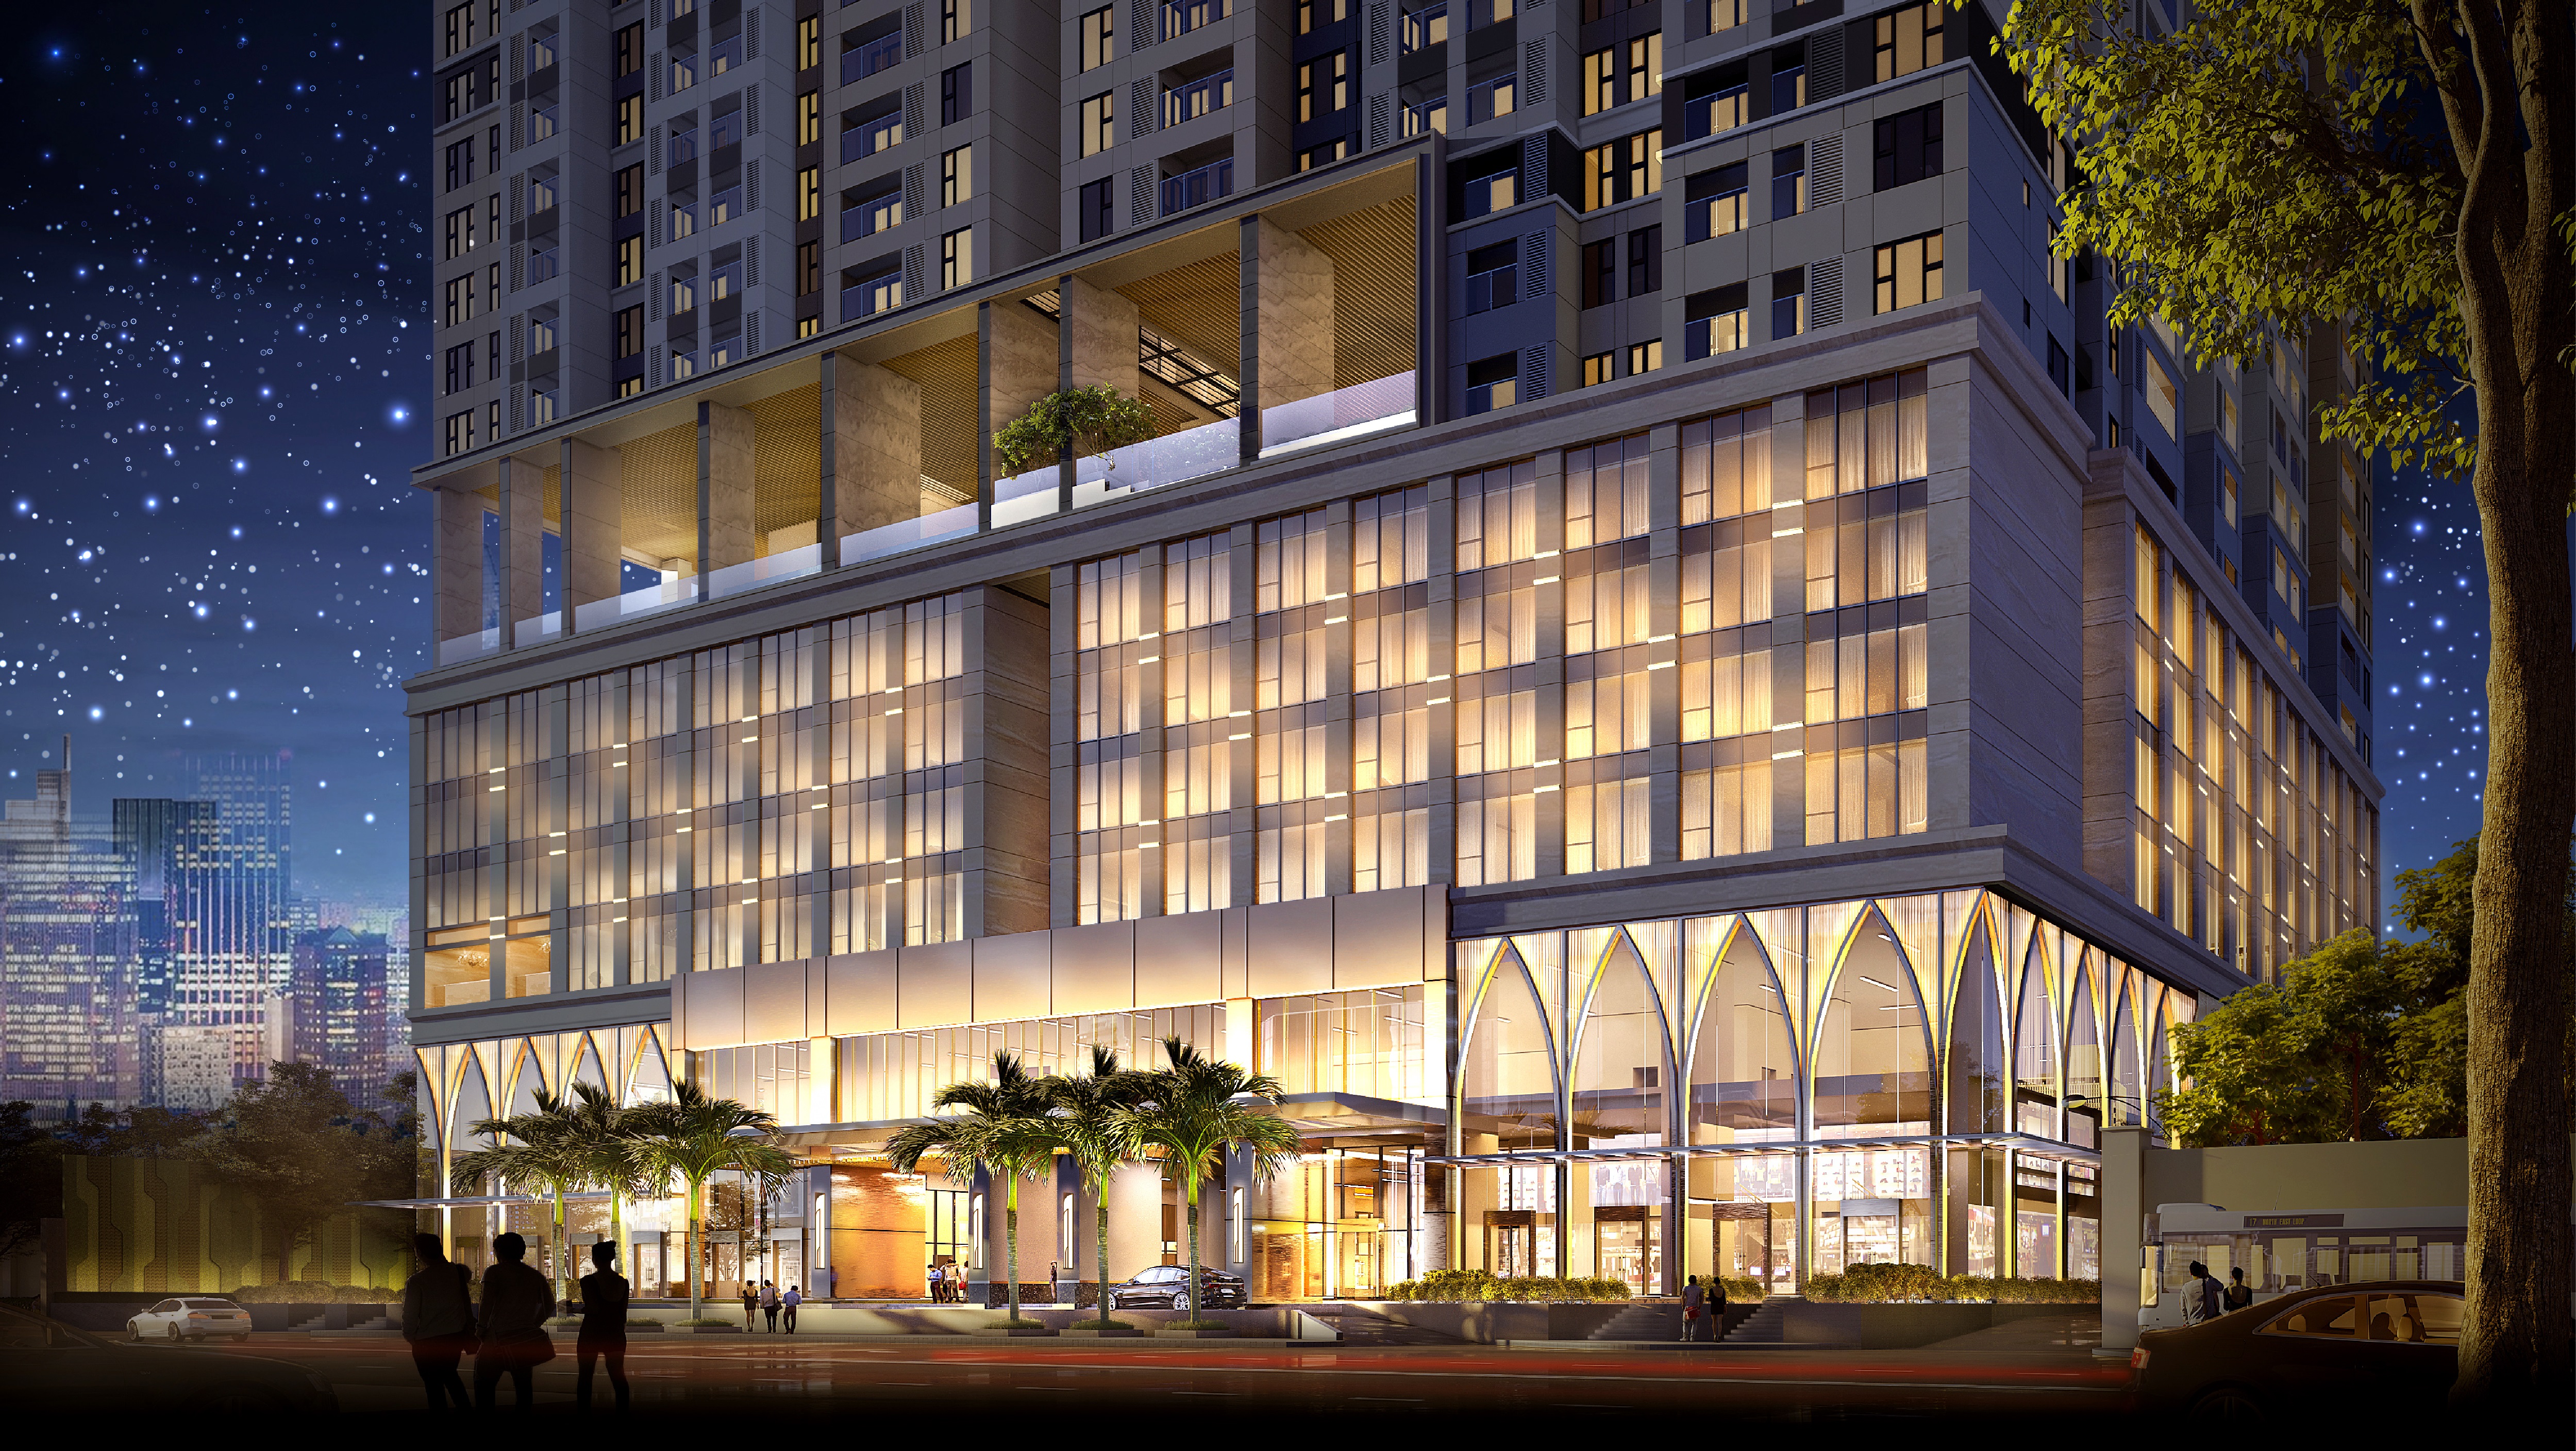 The Grand Manhattan, a complex with housing and a hotel in District 1, HCM City. The five-star Avani Saigon Hotel will come up between floors 3 to 7 in the building.